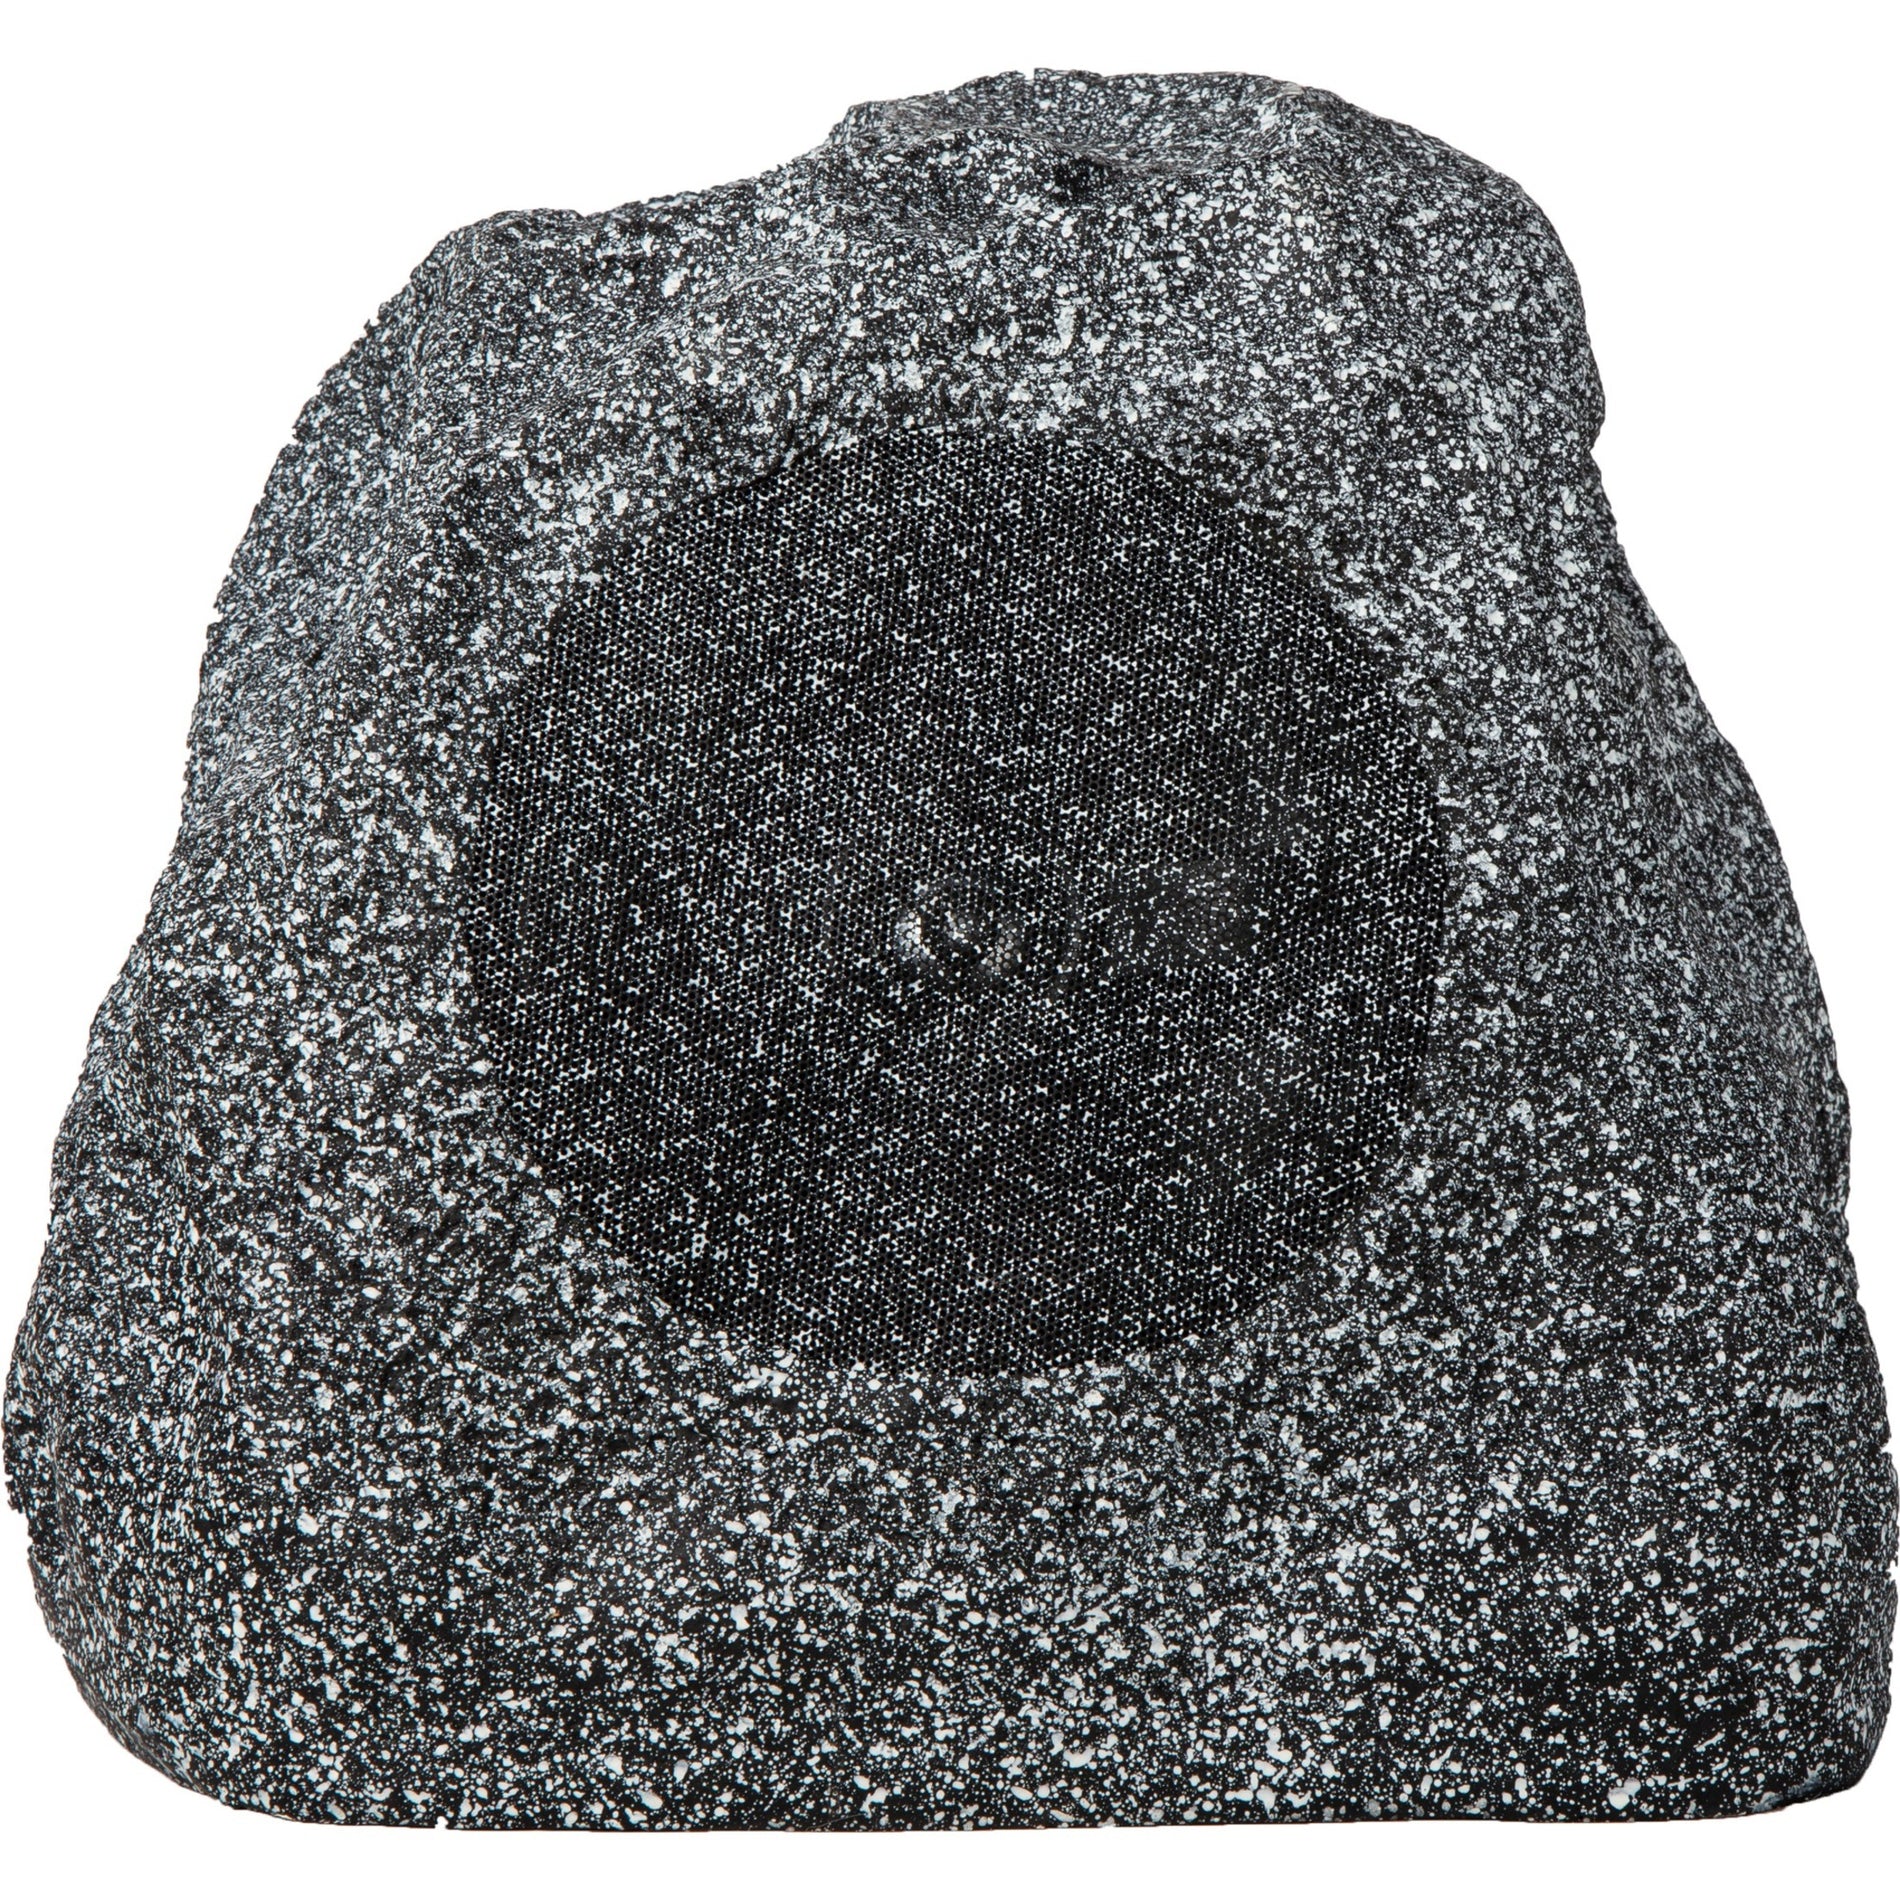 Russound 5R82MK2-G 8" OutBack Rock Speaker, Gray Granite, 2-Way, 125W RMS Output Power